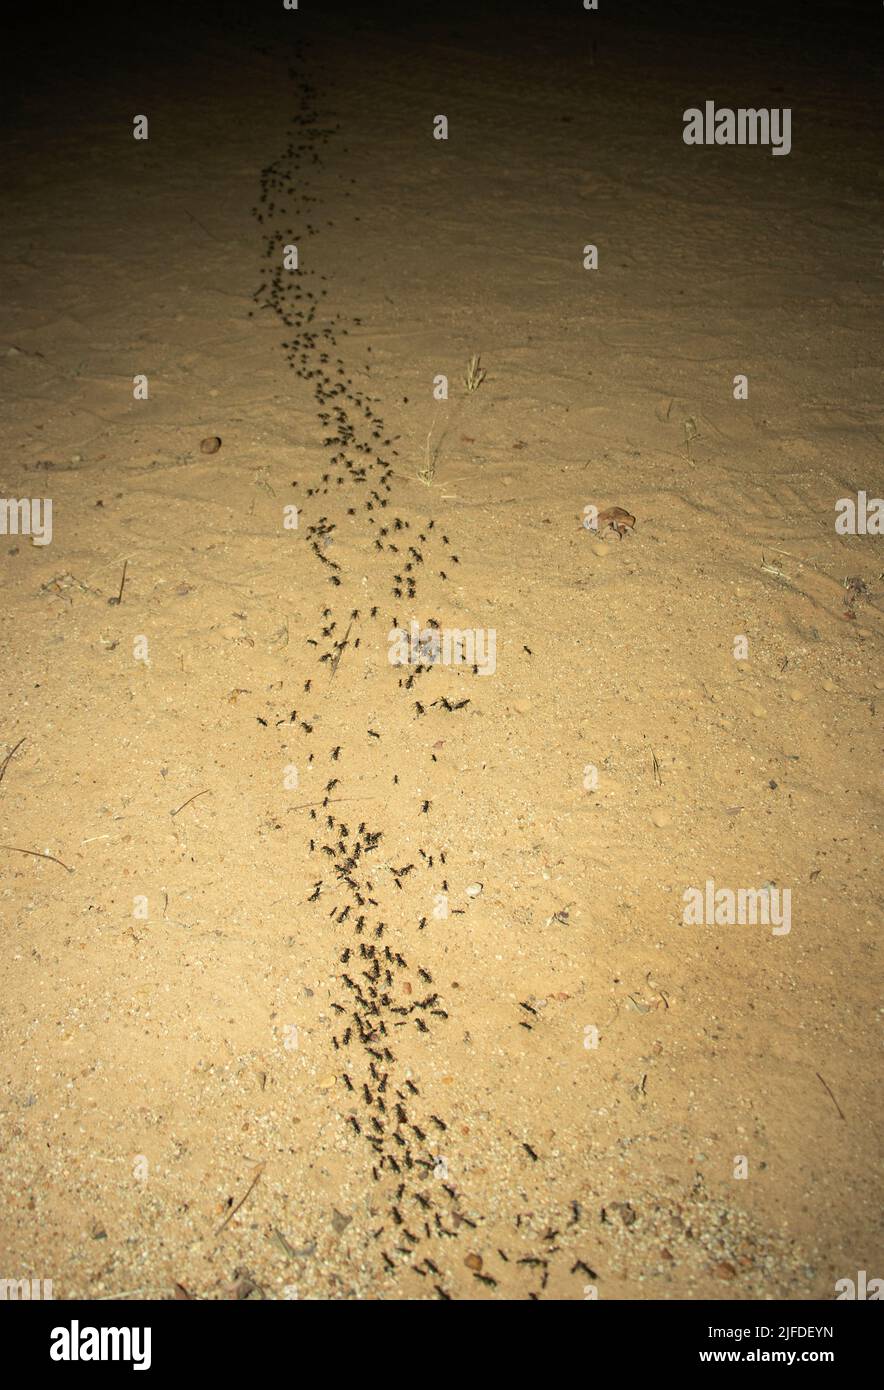 A column of Matabele or Hissing Ants has made a raid on a termite colony and return to their bivouac with their prey. They are formidable predators. Stock Photo